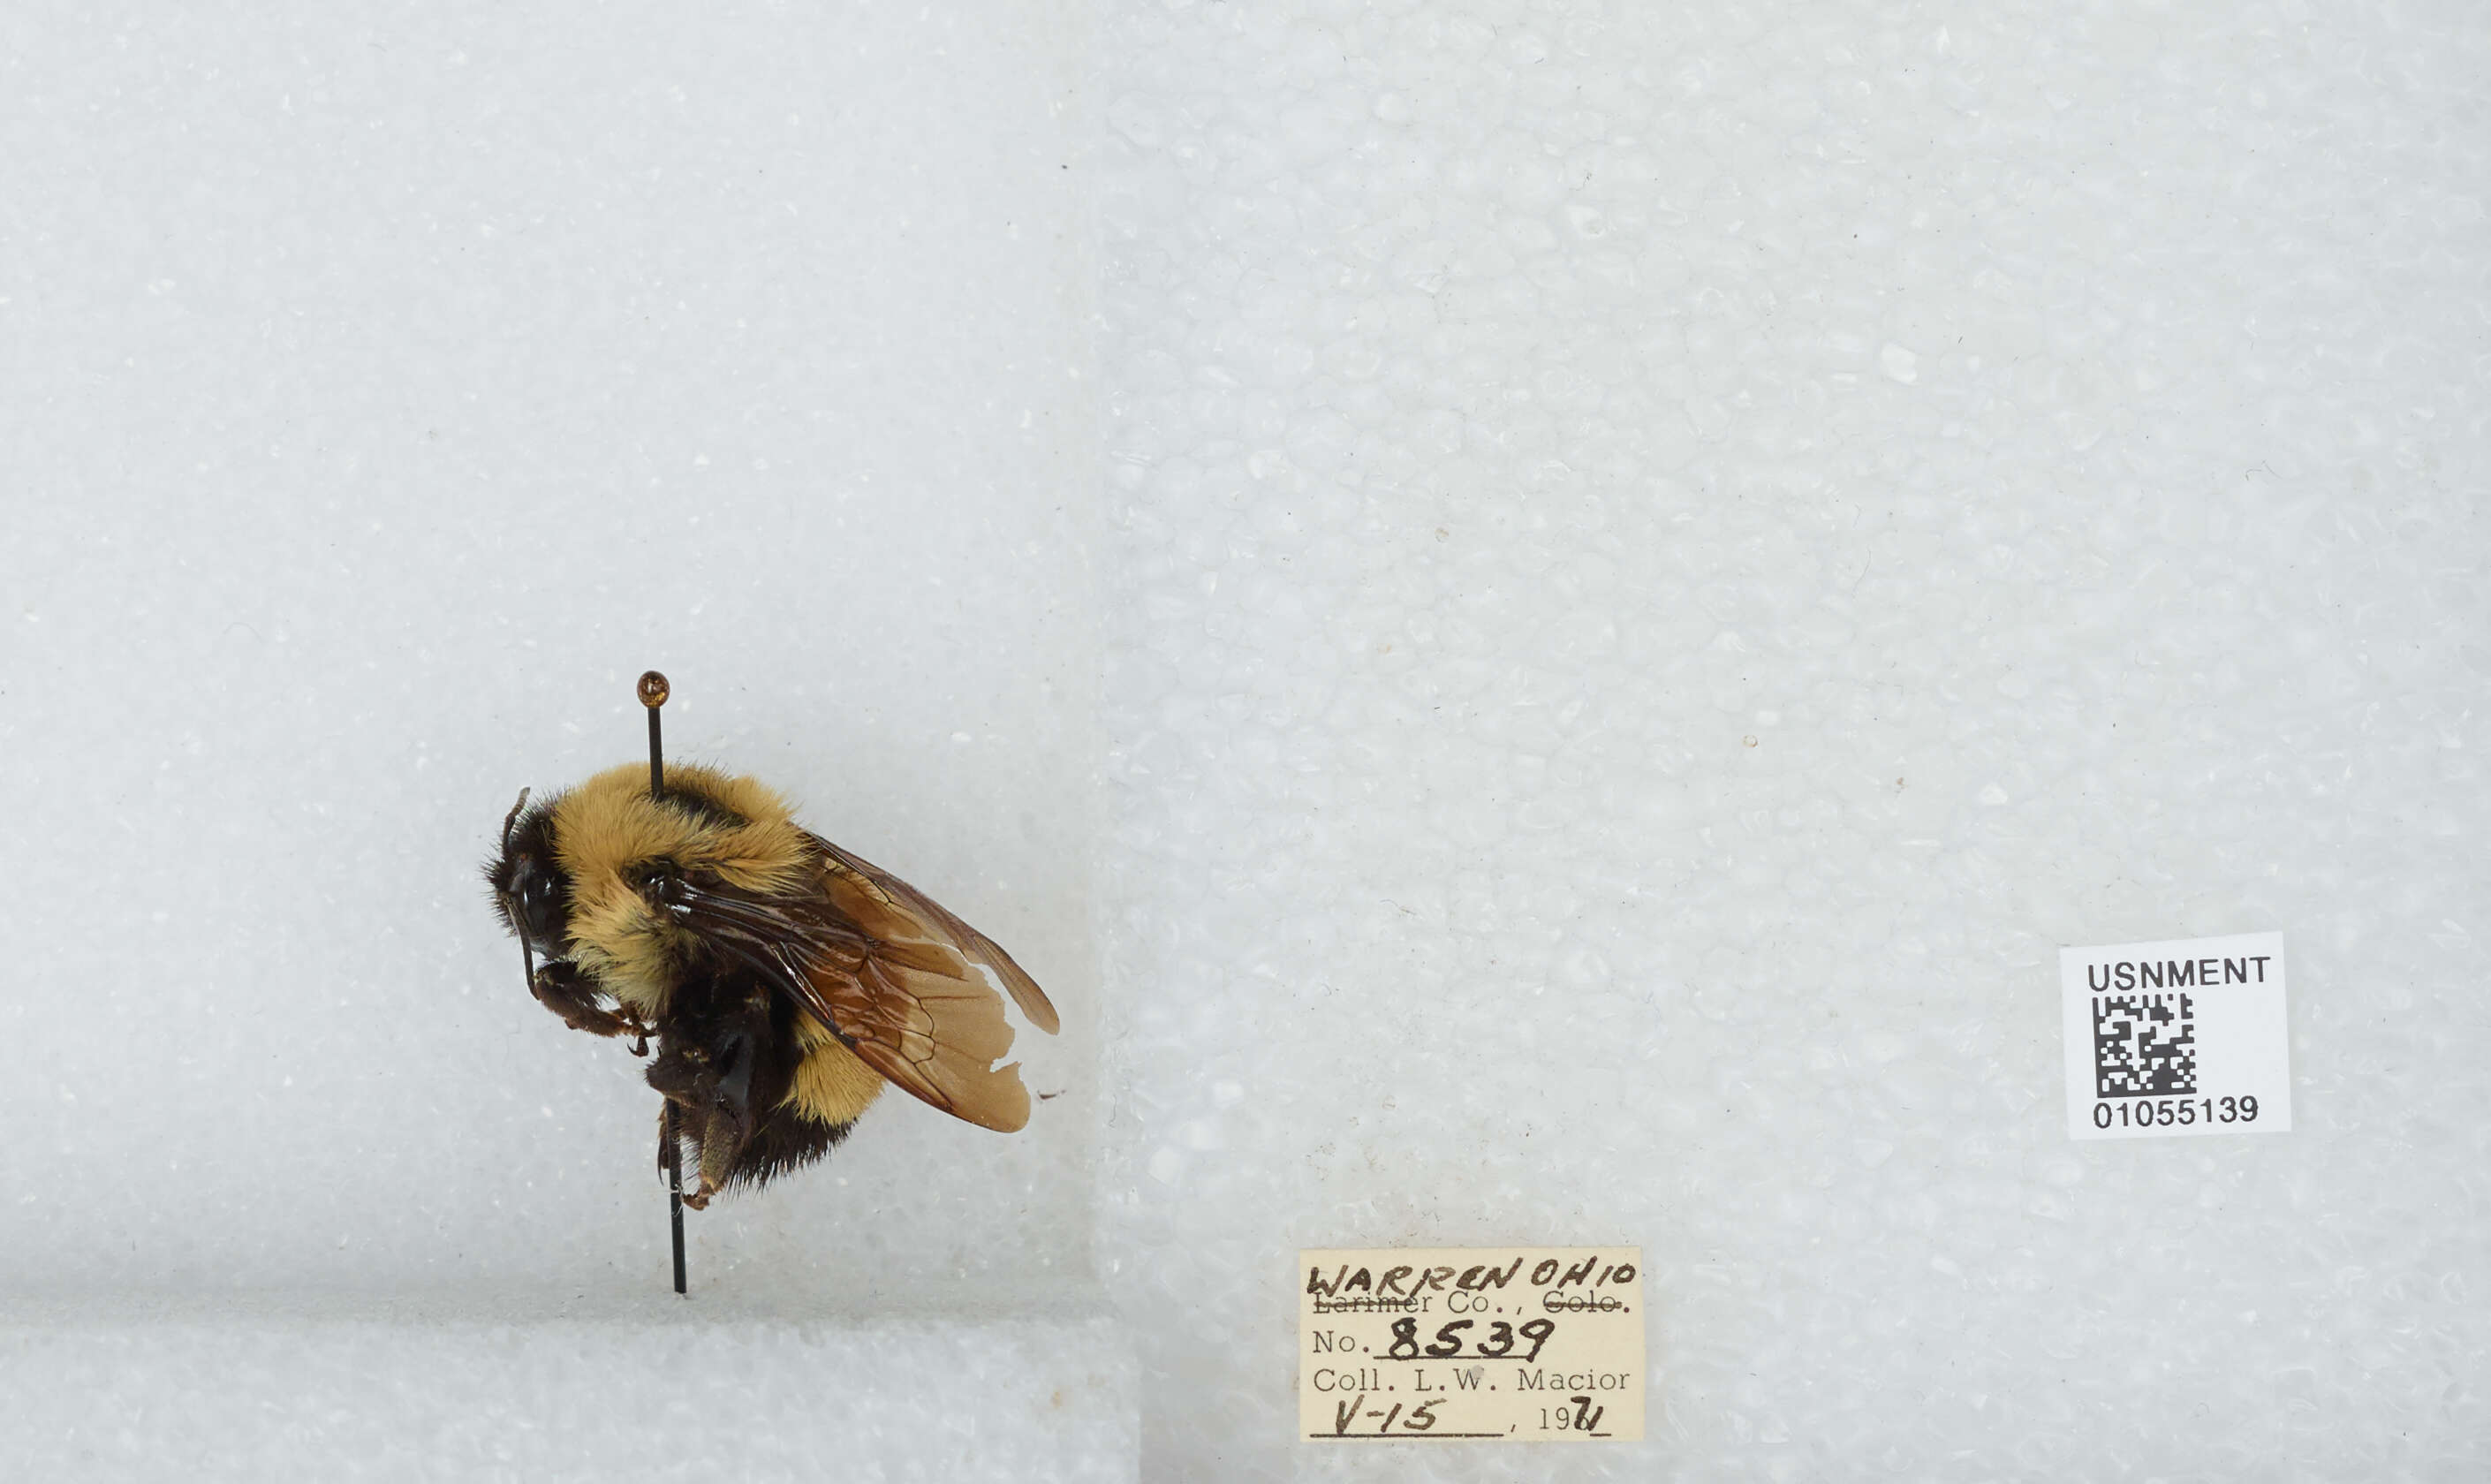 Image of Rusty patched bumble bee